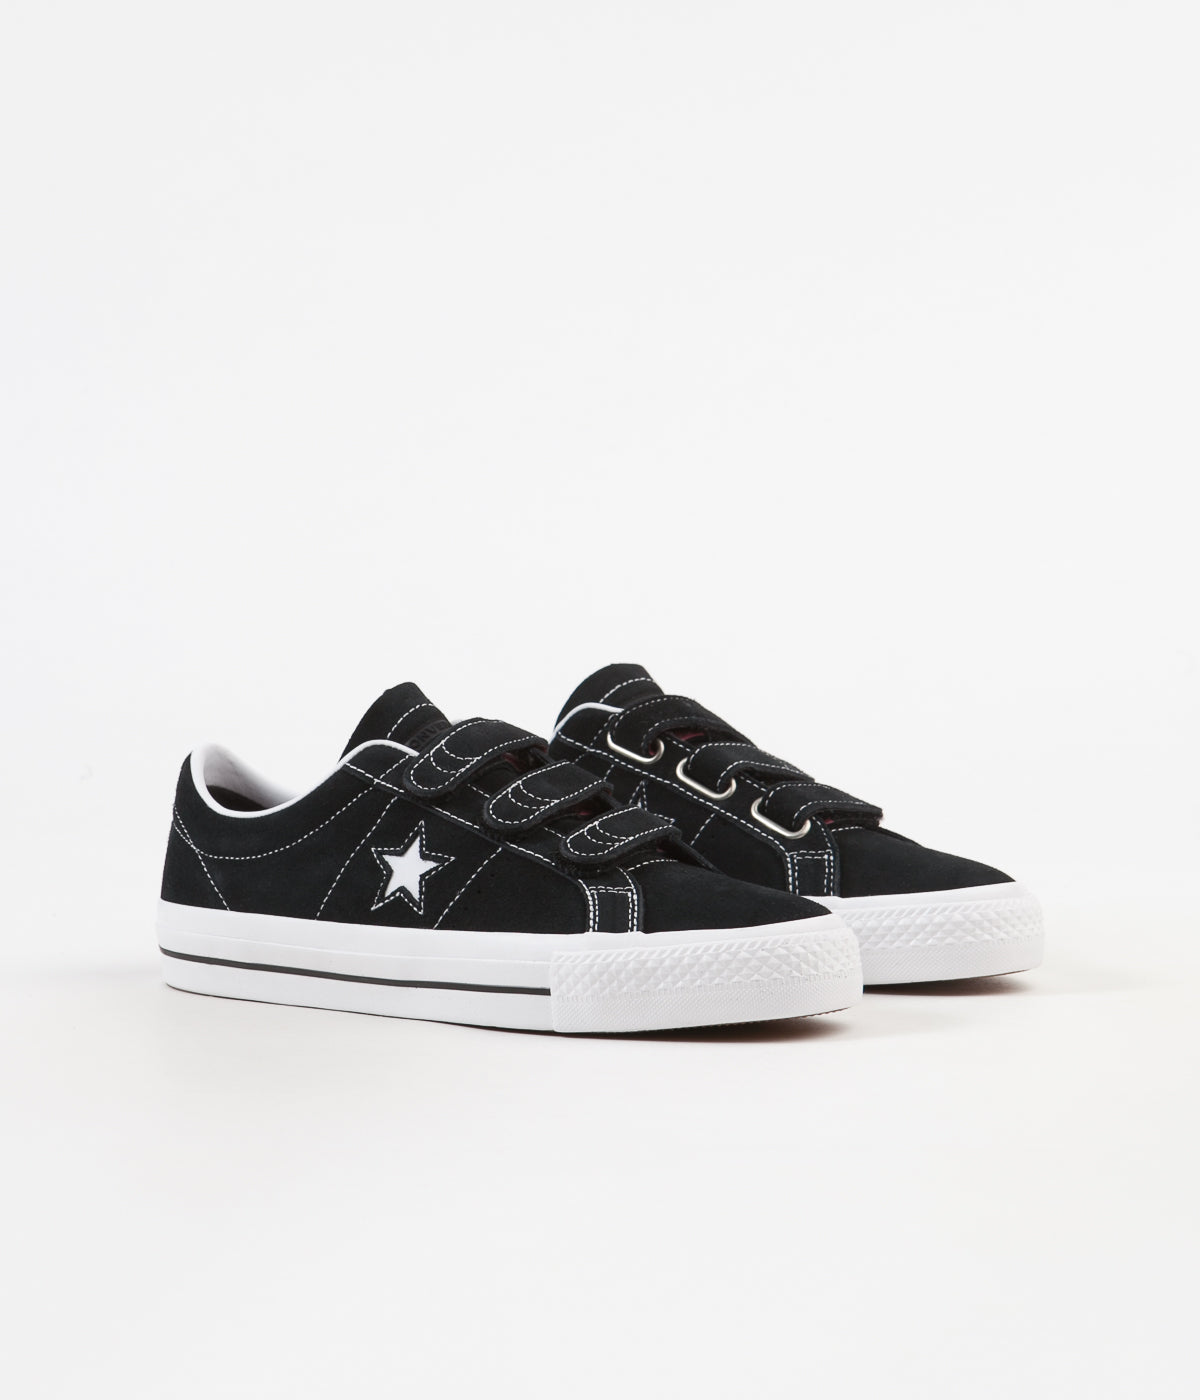 converse black one star low profile leather trainers